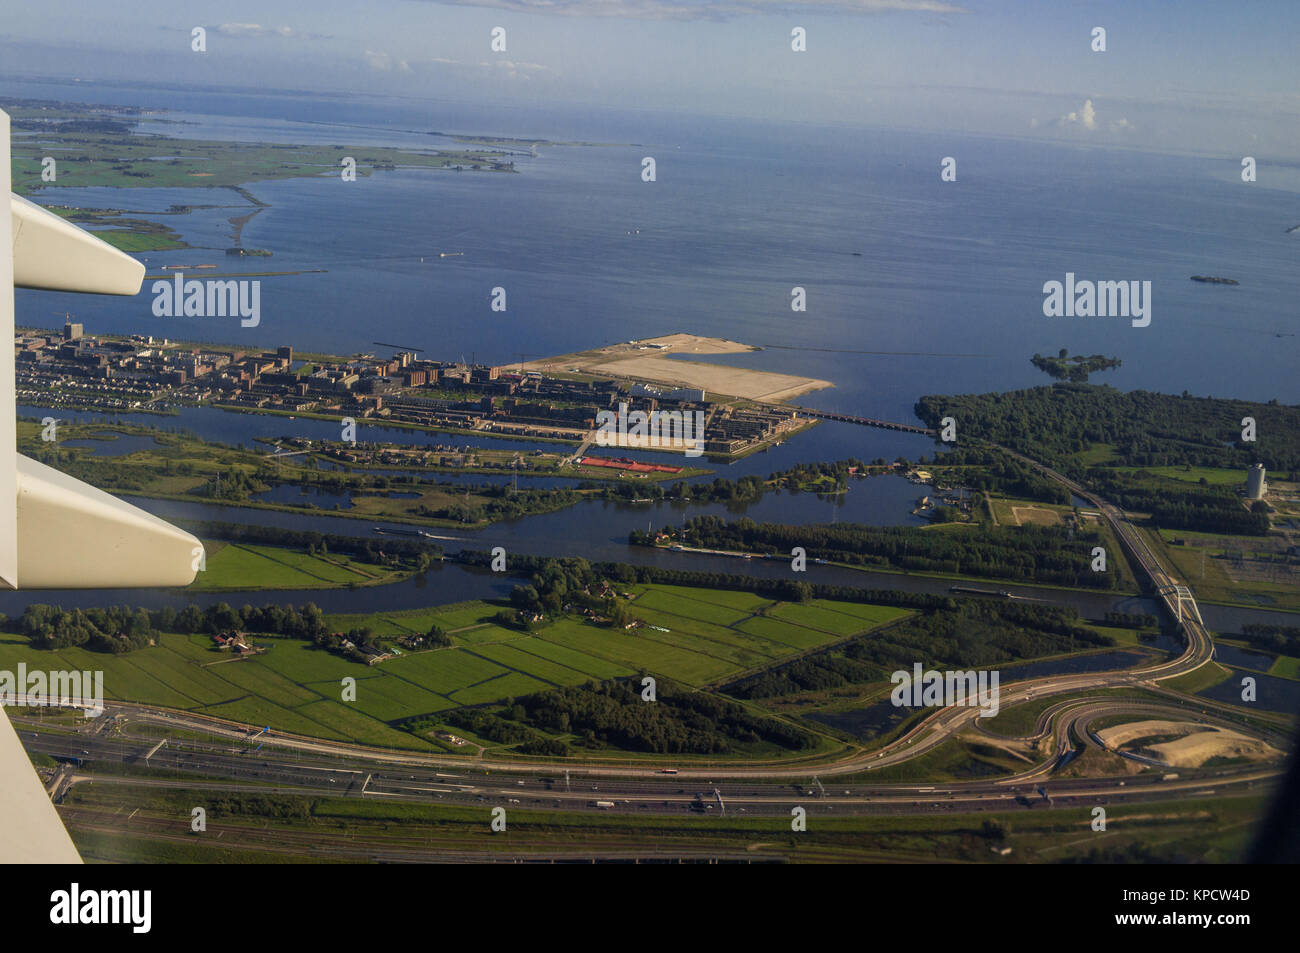 Cargo Harbour Aerial View from Jet Aircraft Porthole Stock Photo